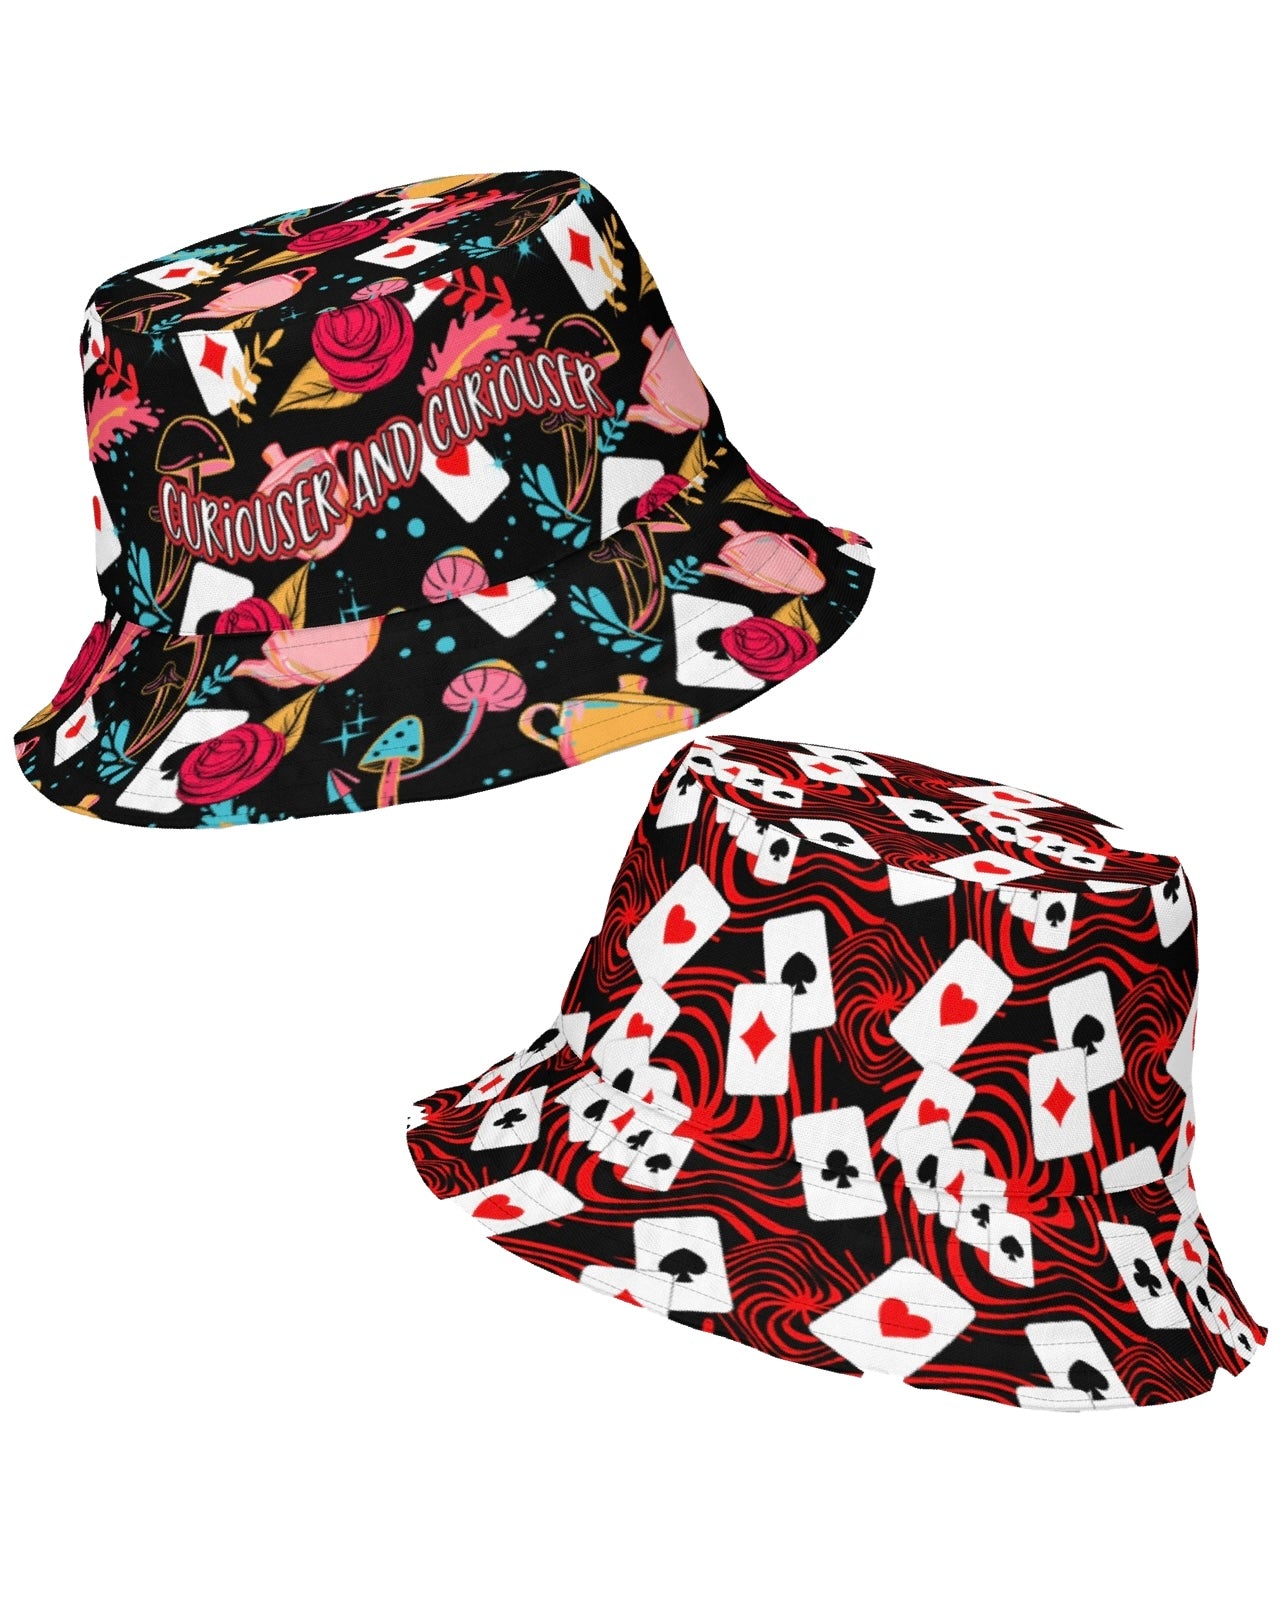 Curiouser and Curiouser / Off With Your Head Reversible Bucket Hat, Bucket Hat, - One Stop Rave